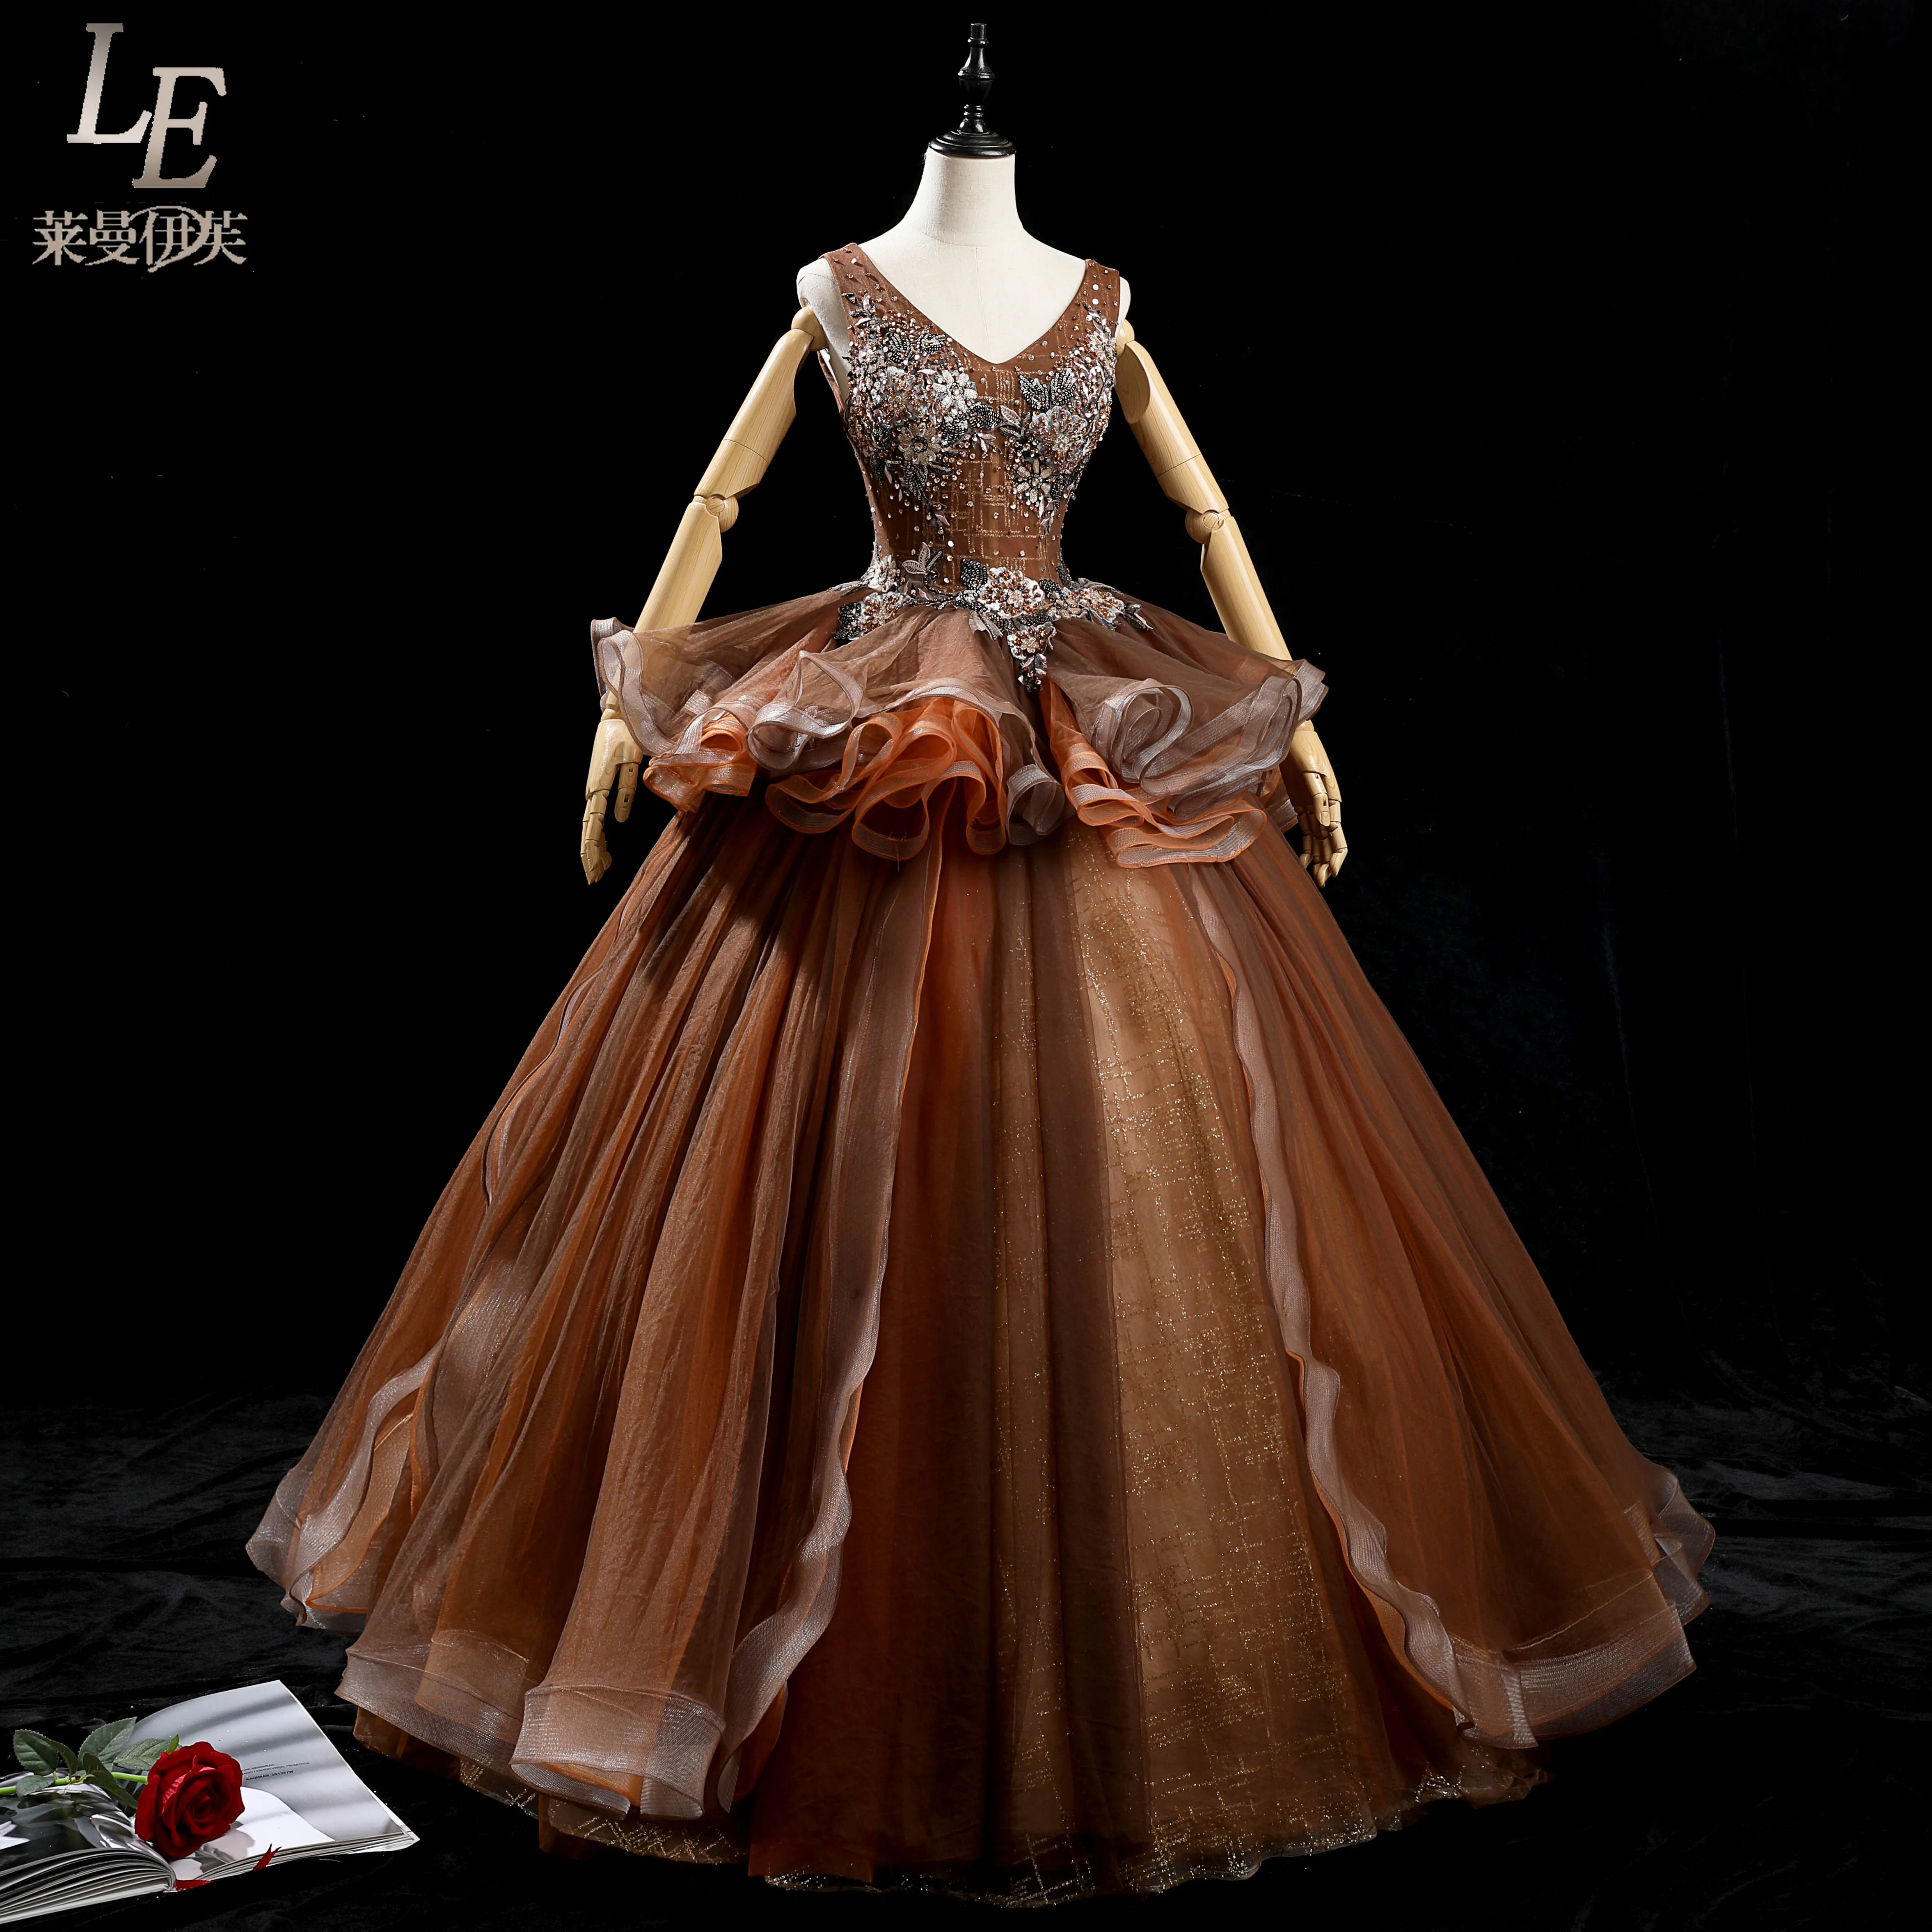 

luxury rococo coffee beading embroidery royal queen long dress medieval Renaissance Victoria ball gown